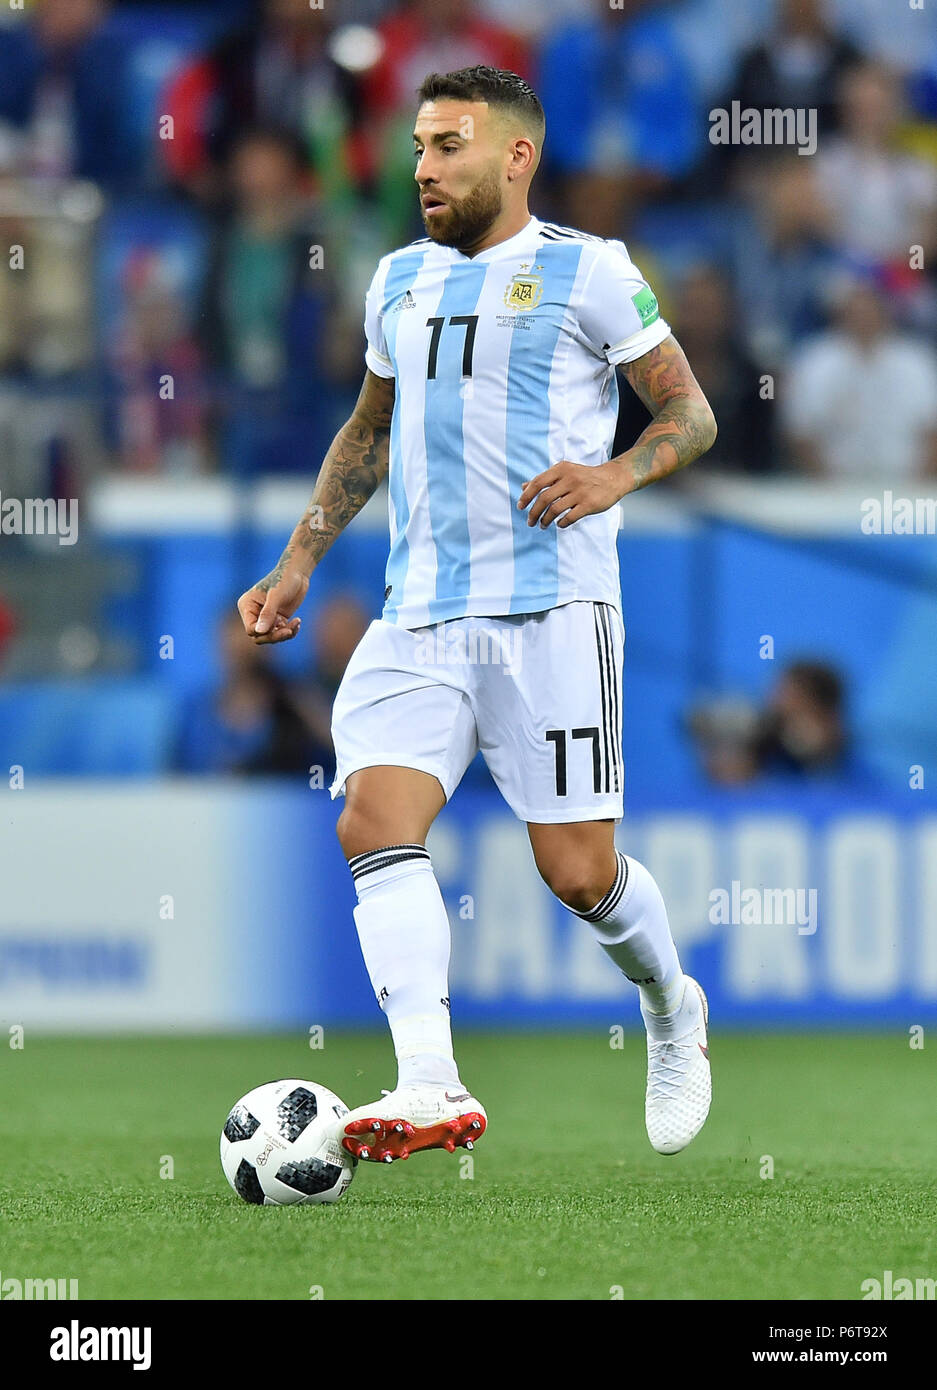 NIZHNIY NOVGOROD, RUSSIA - JUNE 21: Nicolas Otamendi of Argentina in action during the 2018 FIFA World Cup Russia group D match between Argentina and Croatia at Nizhniy Novgorod Stadium on June 21, 2018 in Nizhniy Novgorod, Russia. (Photo by Lukasz Laskowski/PressFocus/MB Media) Stock Photo